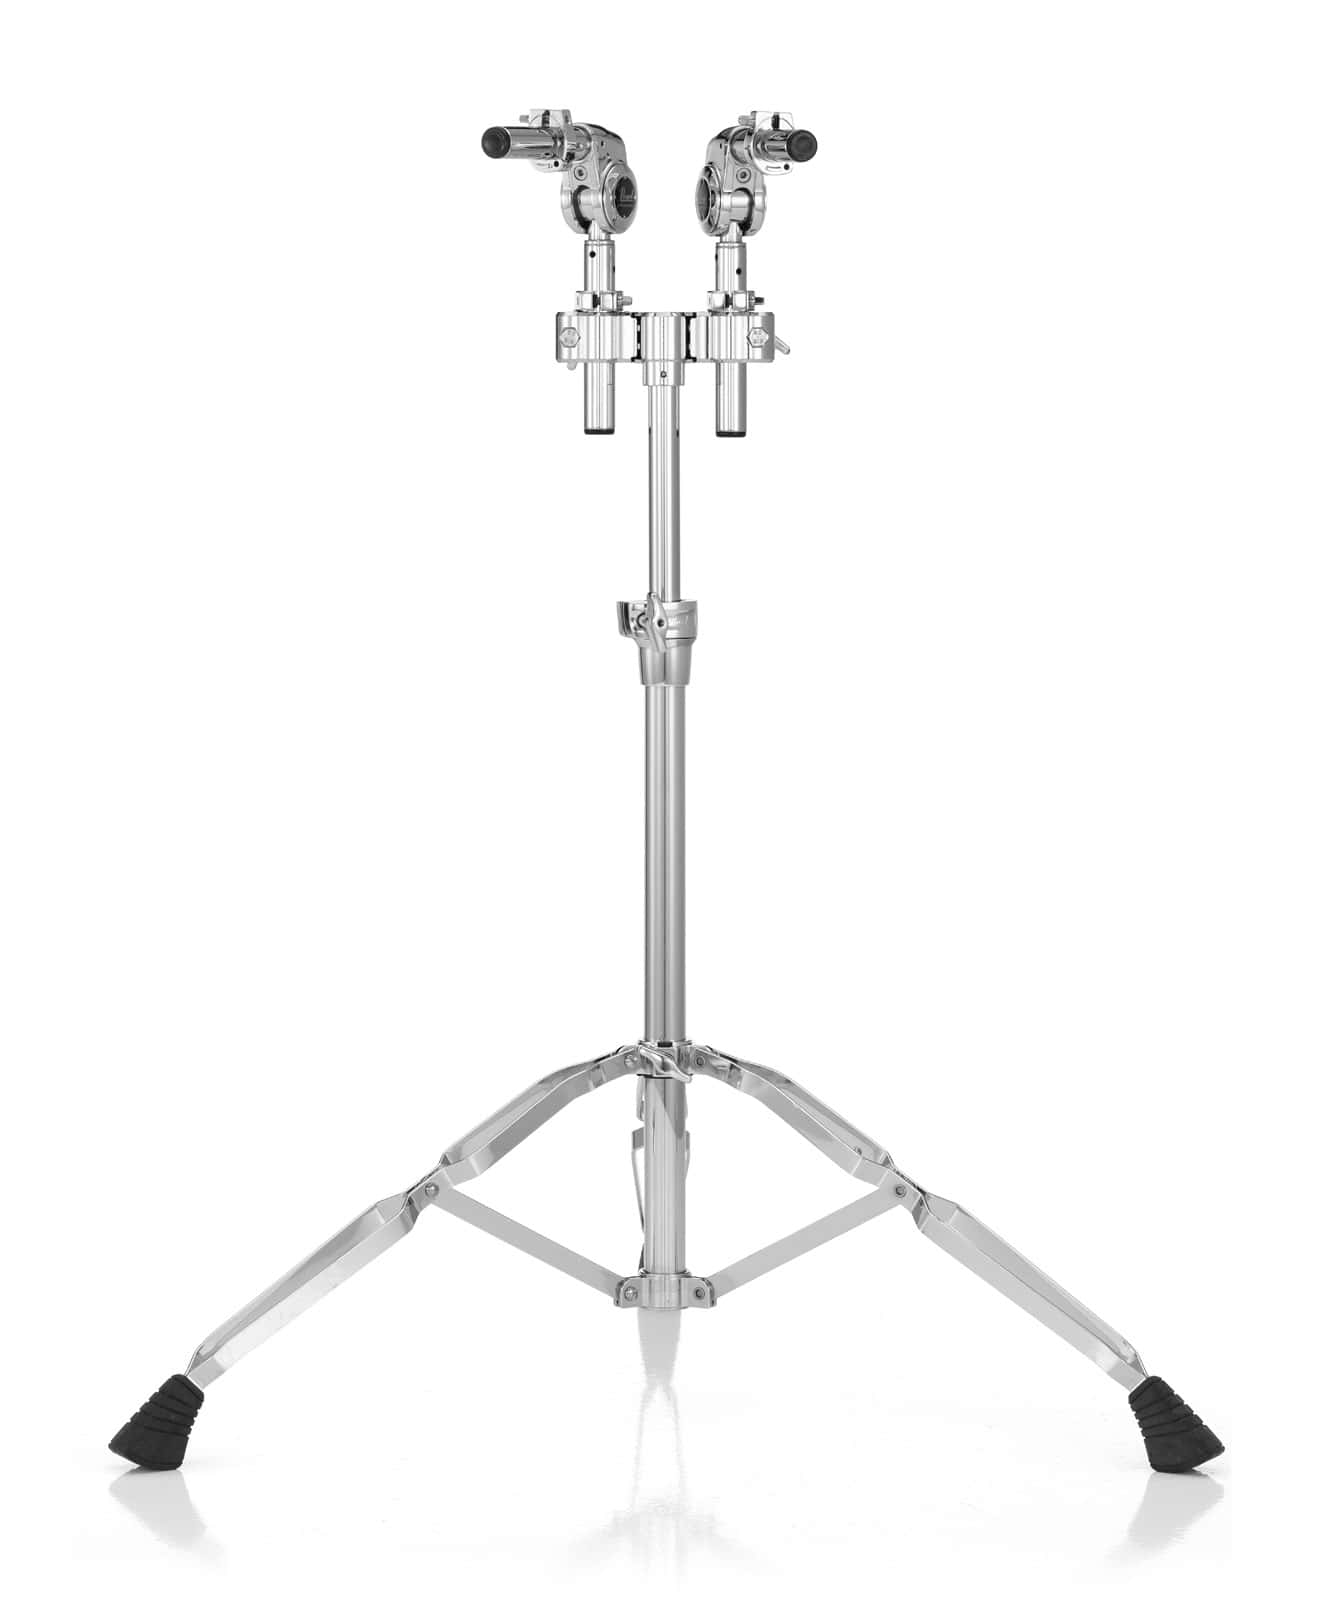 PEARL DRUMS HARDWARE T-1035 STAND DOUBLE TOMS STANDARD GYROLOCK